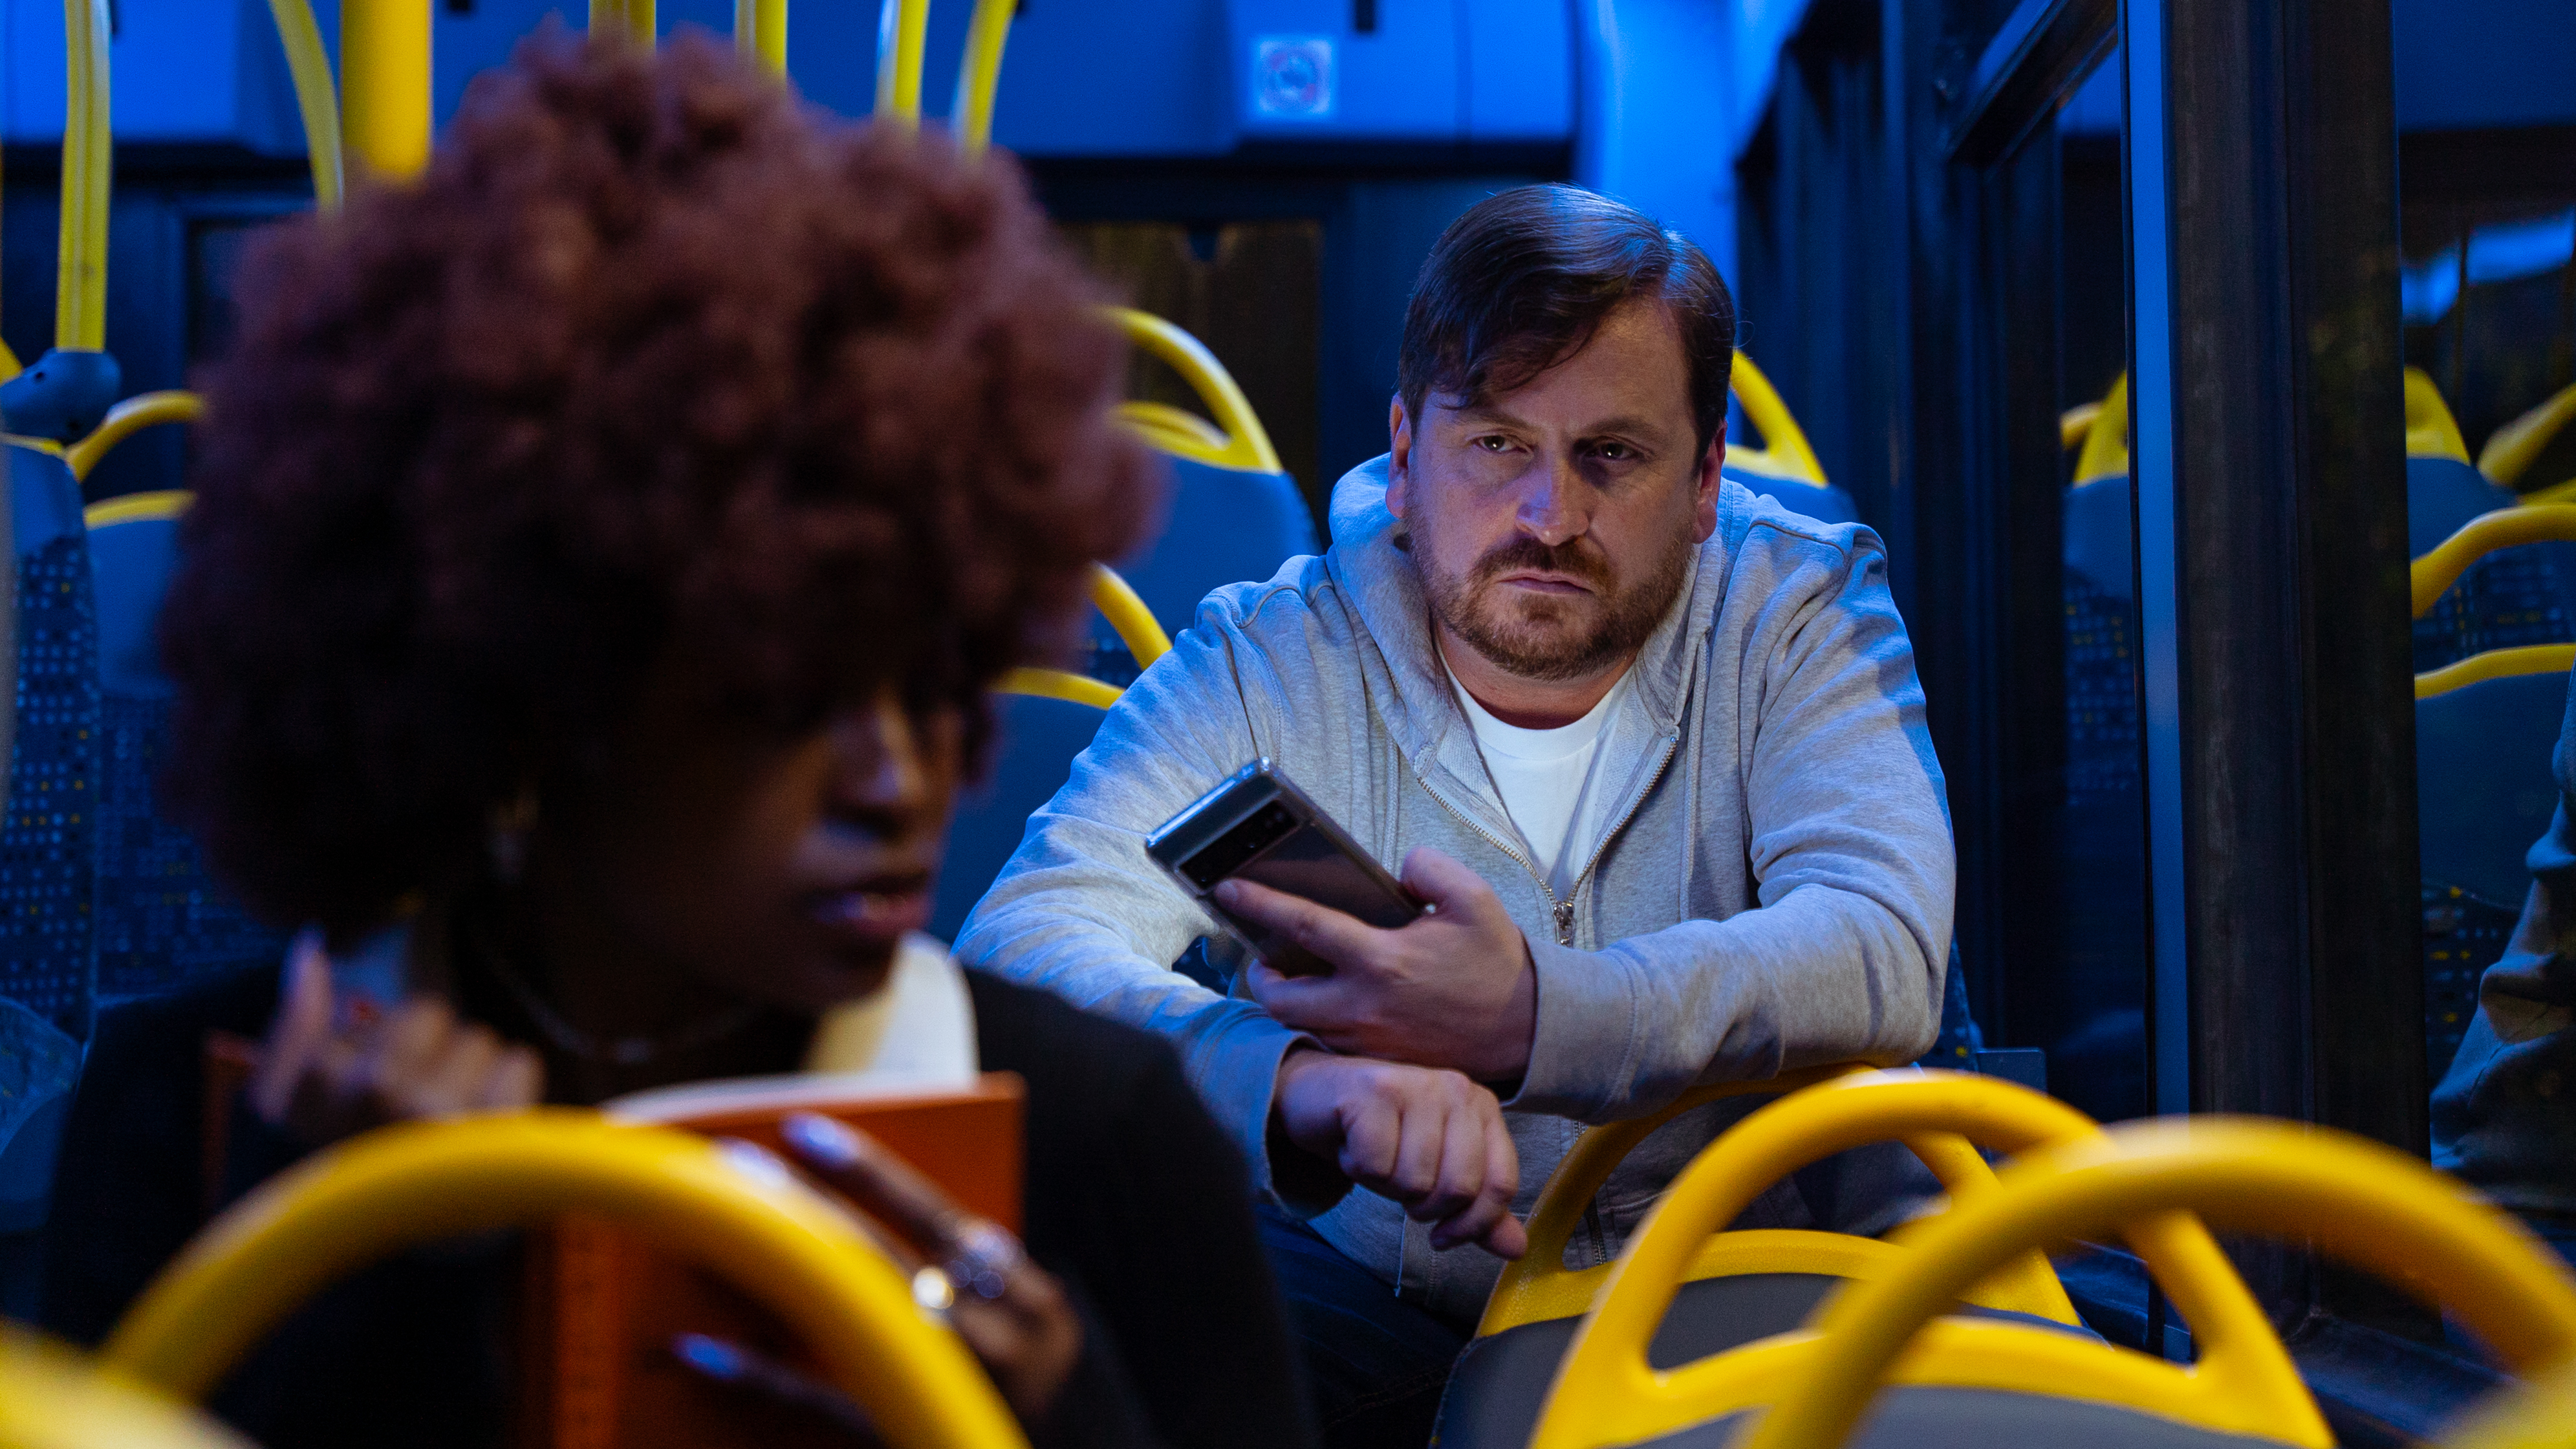 Man staring at a woman on a bus